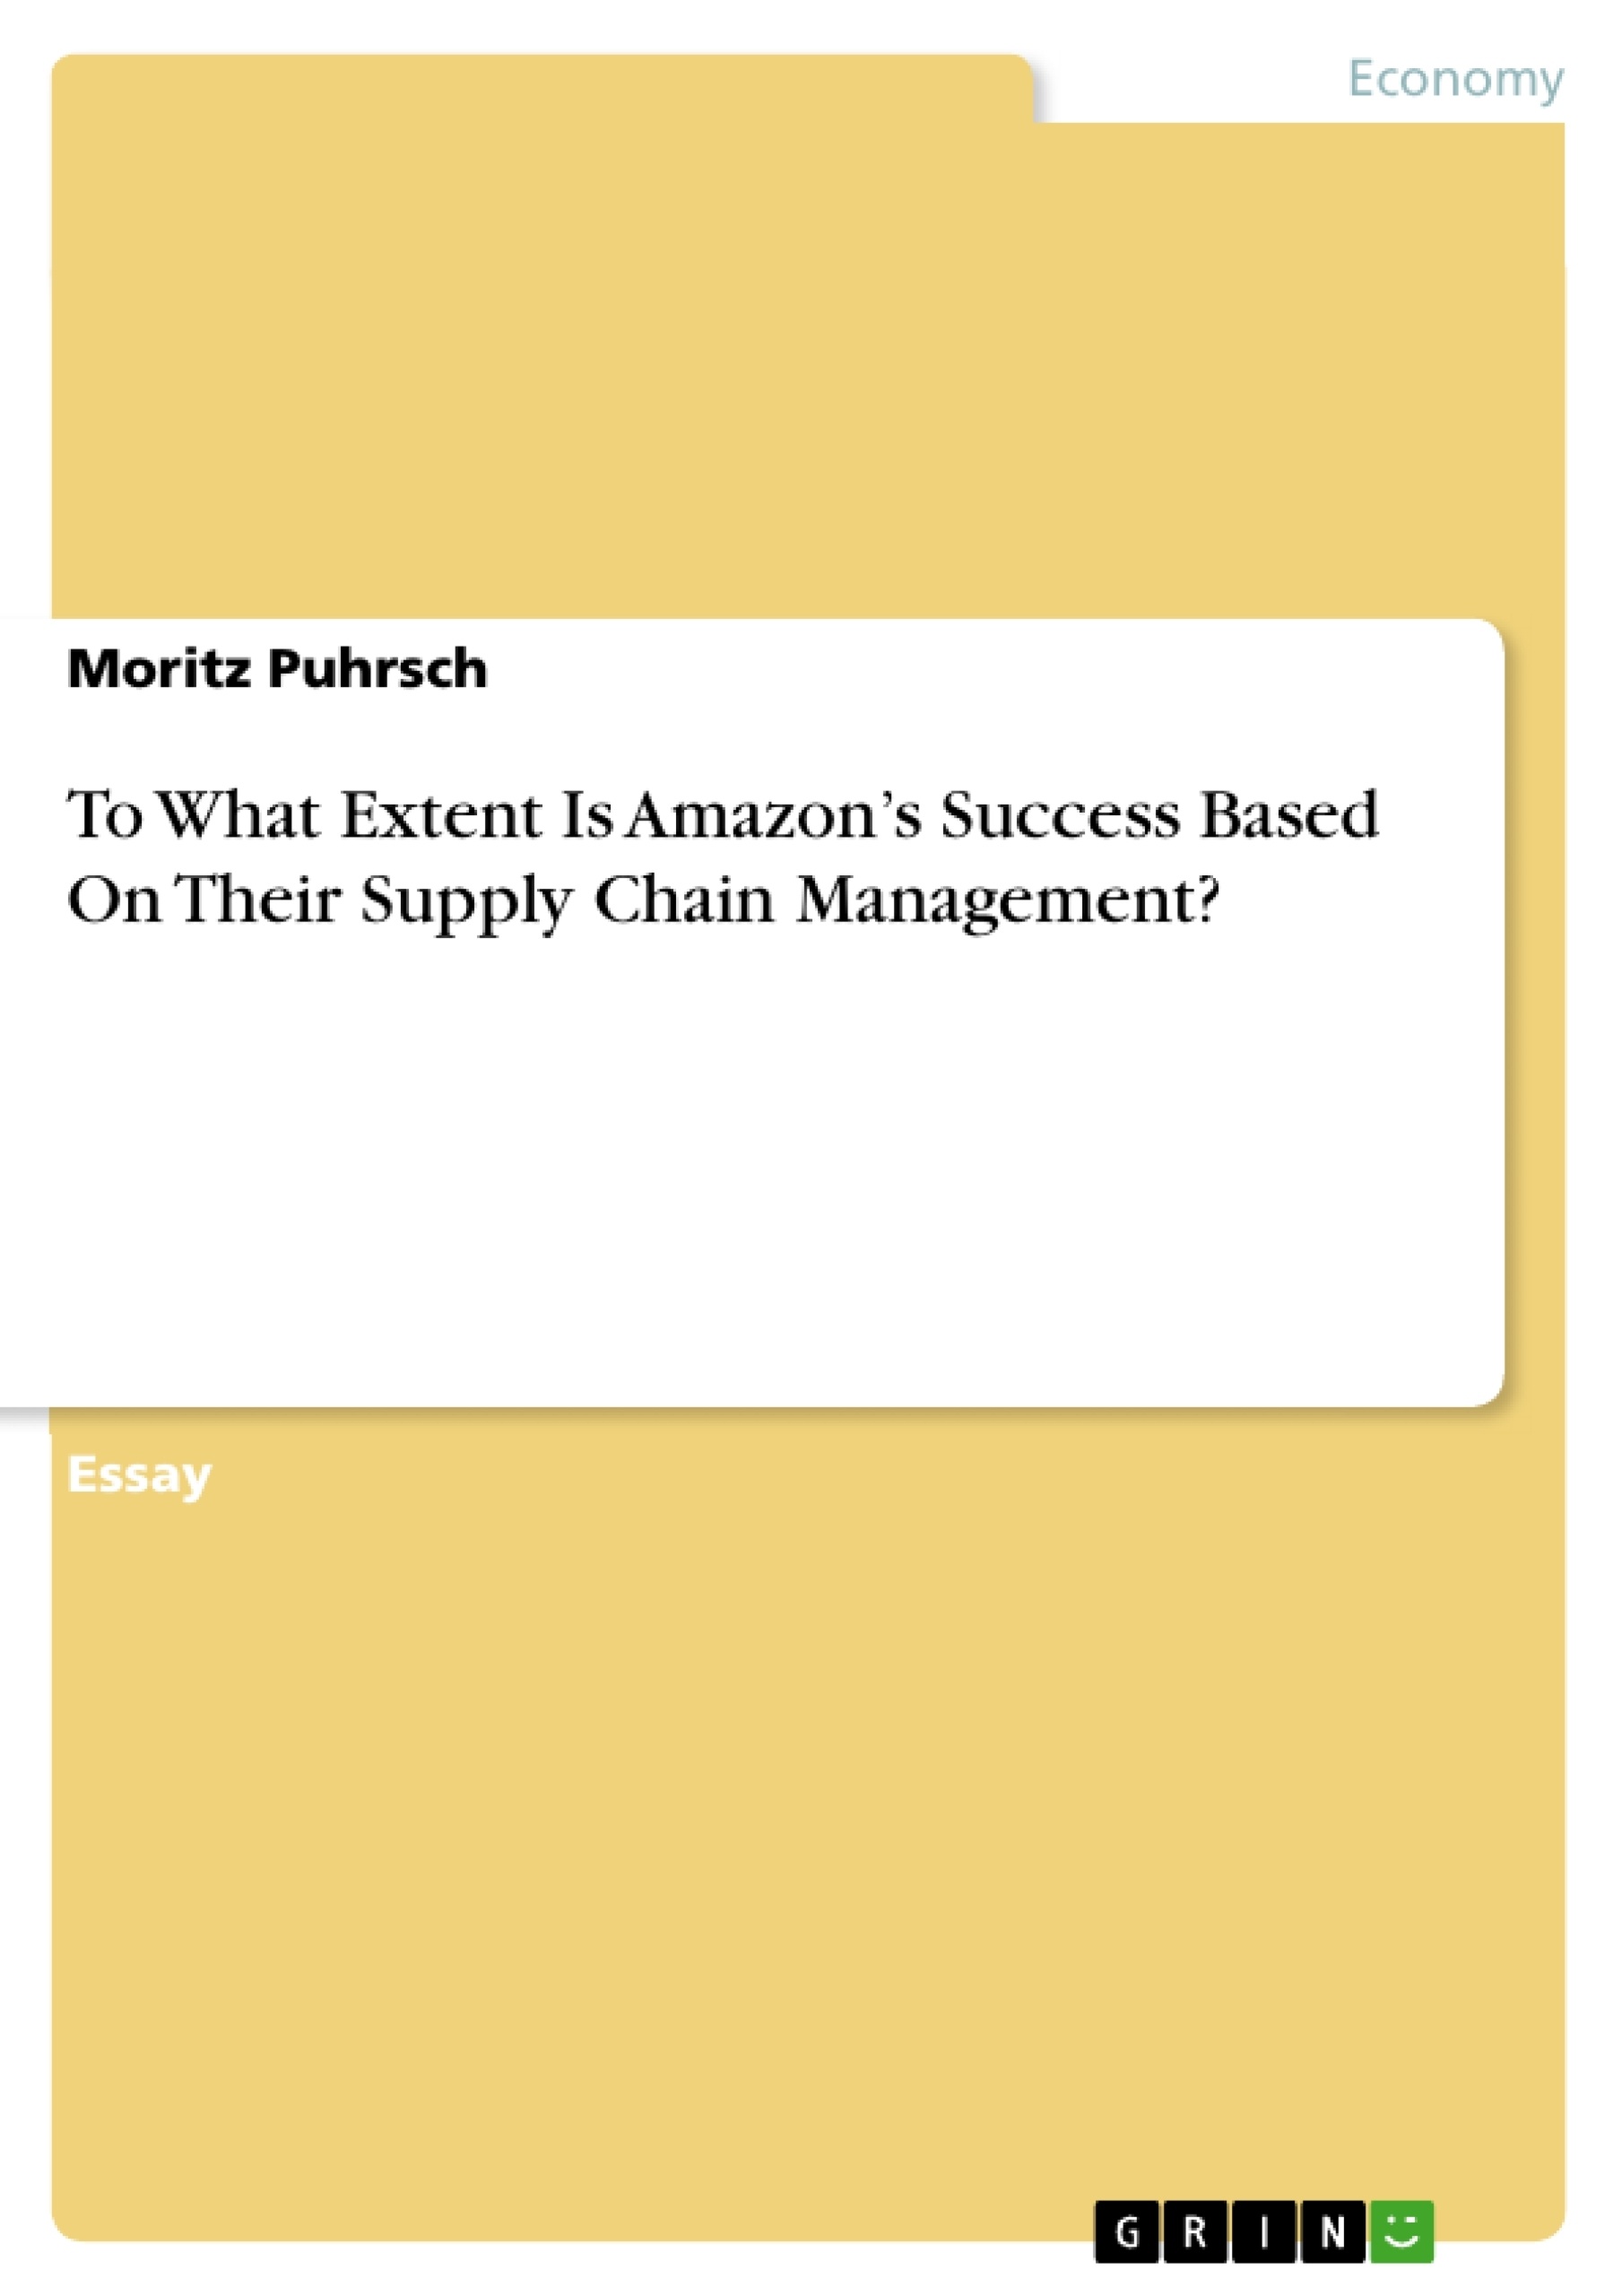 Title: To What Extent Is Amazon’s Success Based On Their Supply Chain Management?